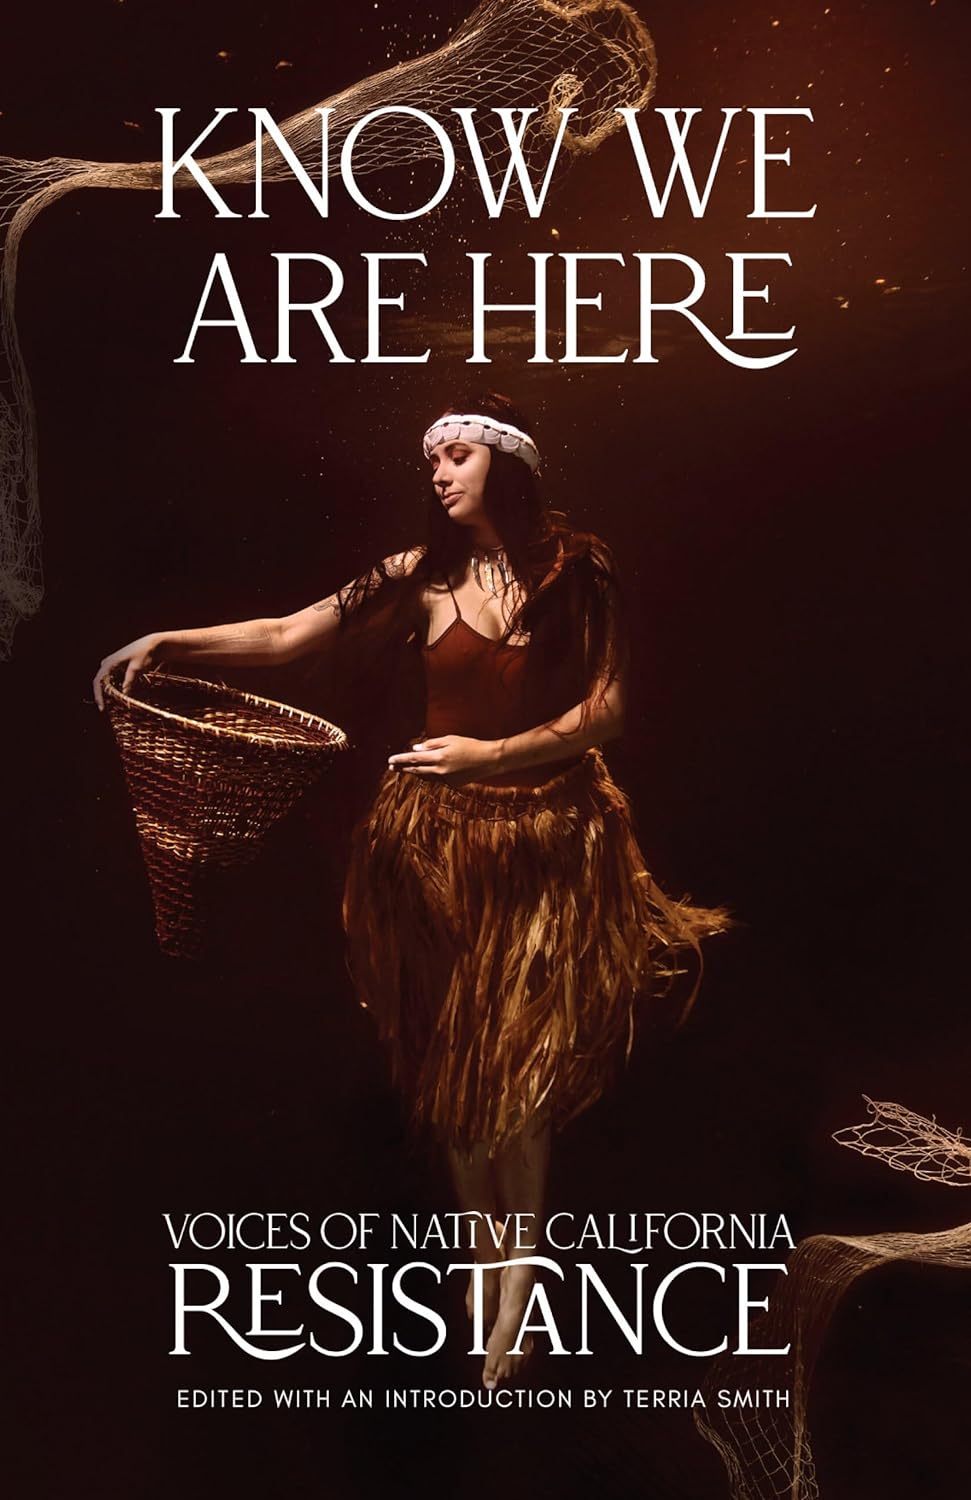 Know We Are Here: Voices of Native California Resistance edited by Terria Smith